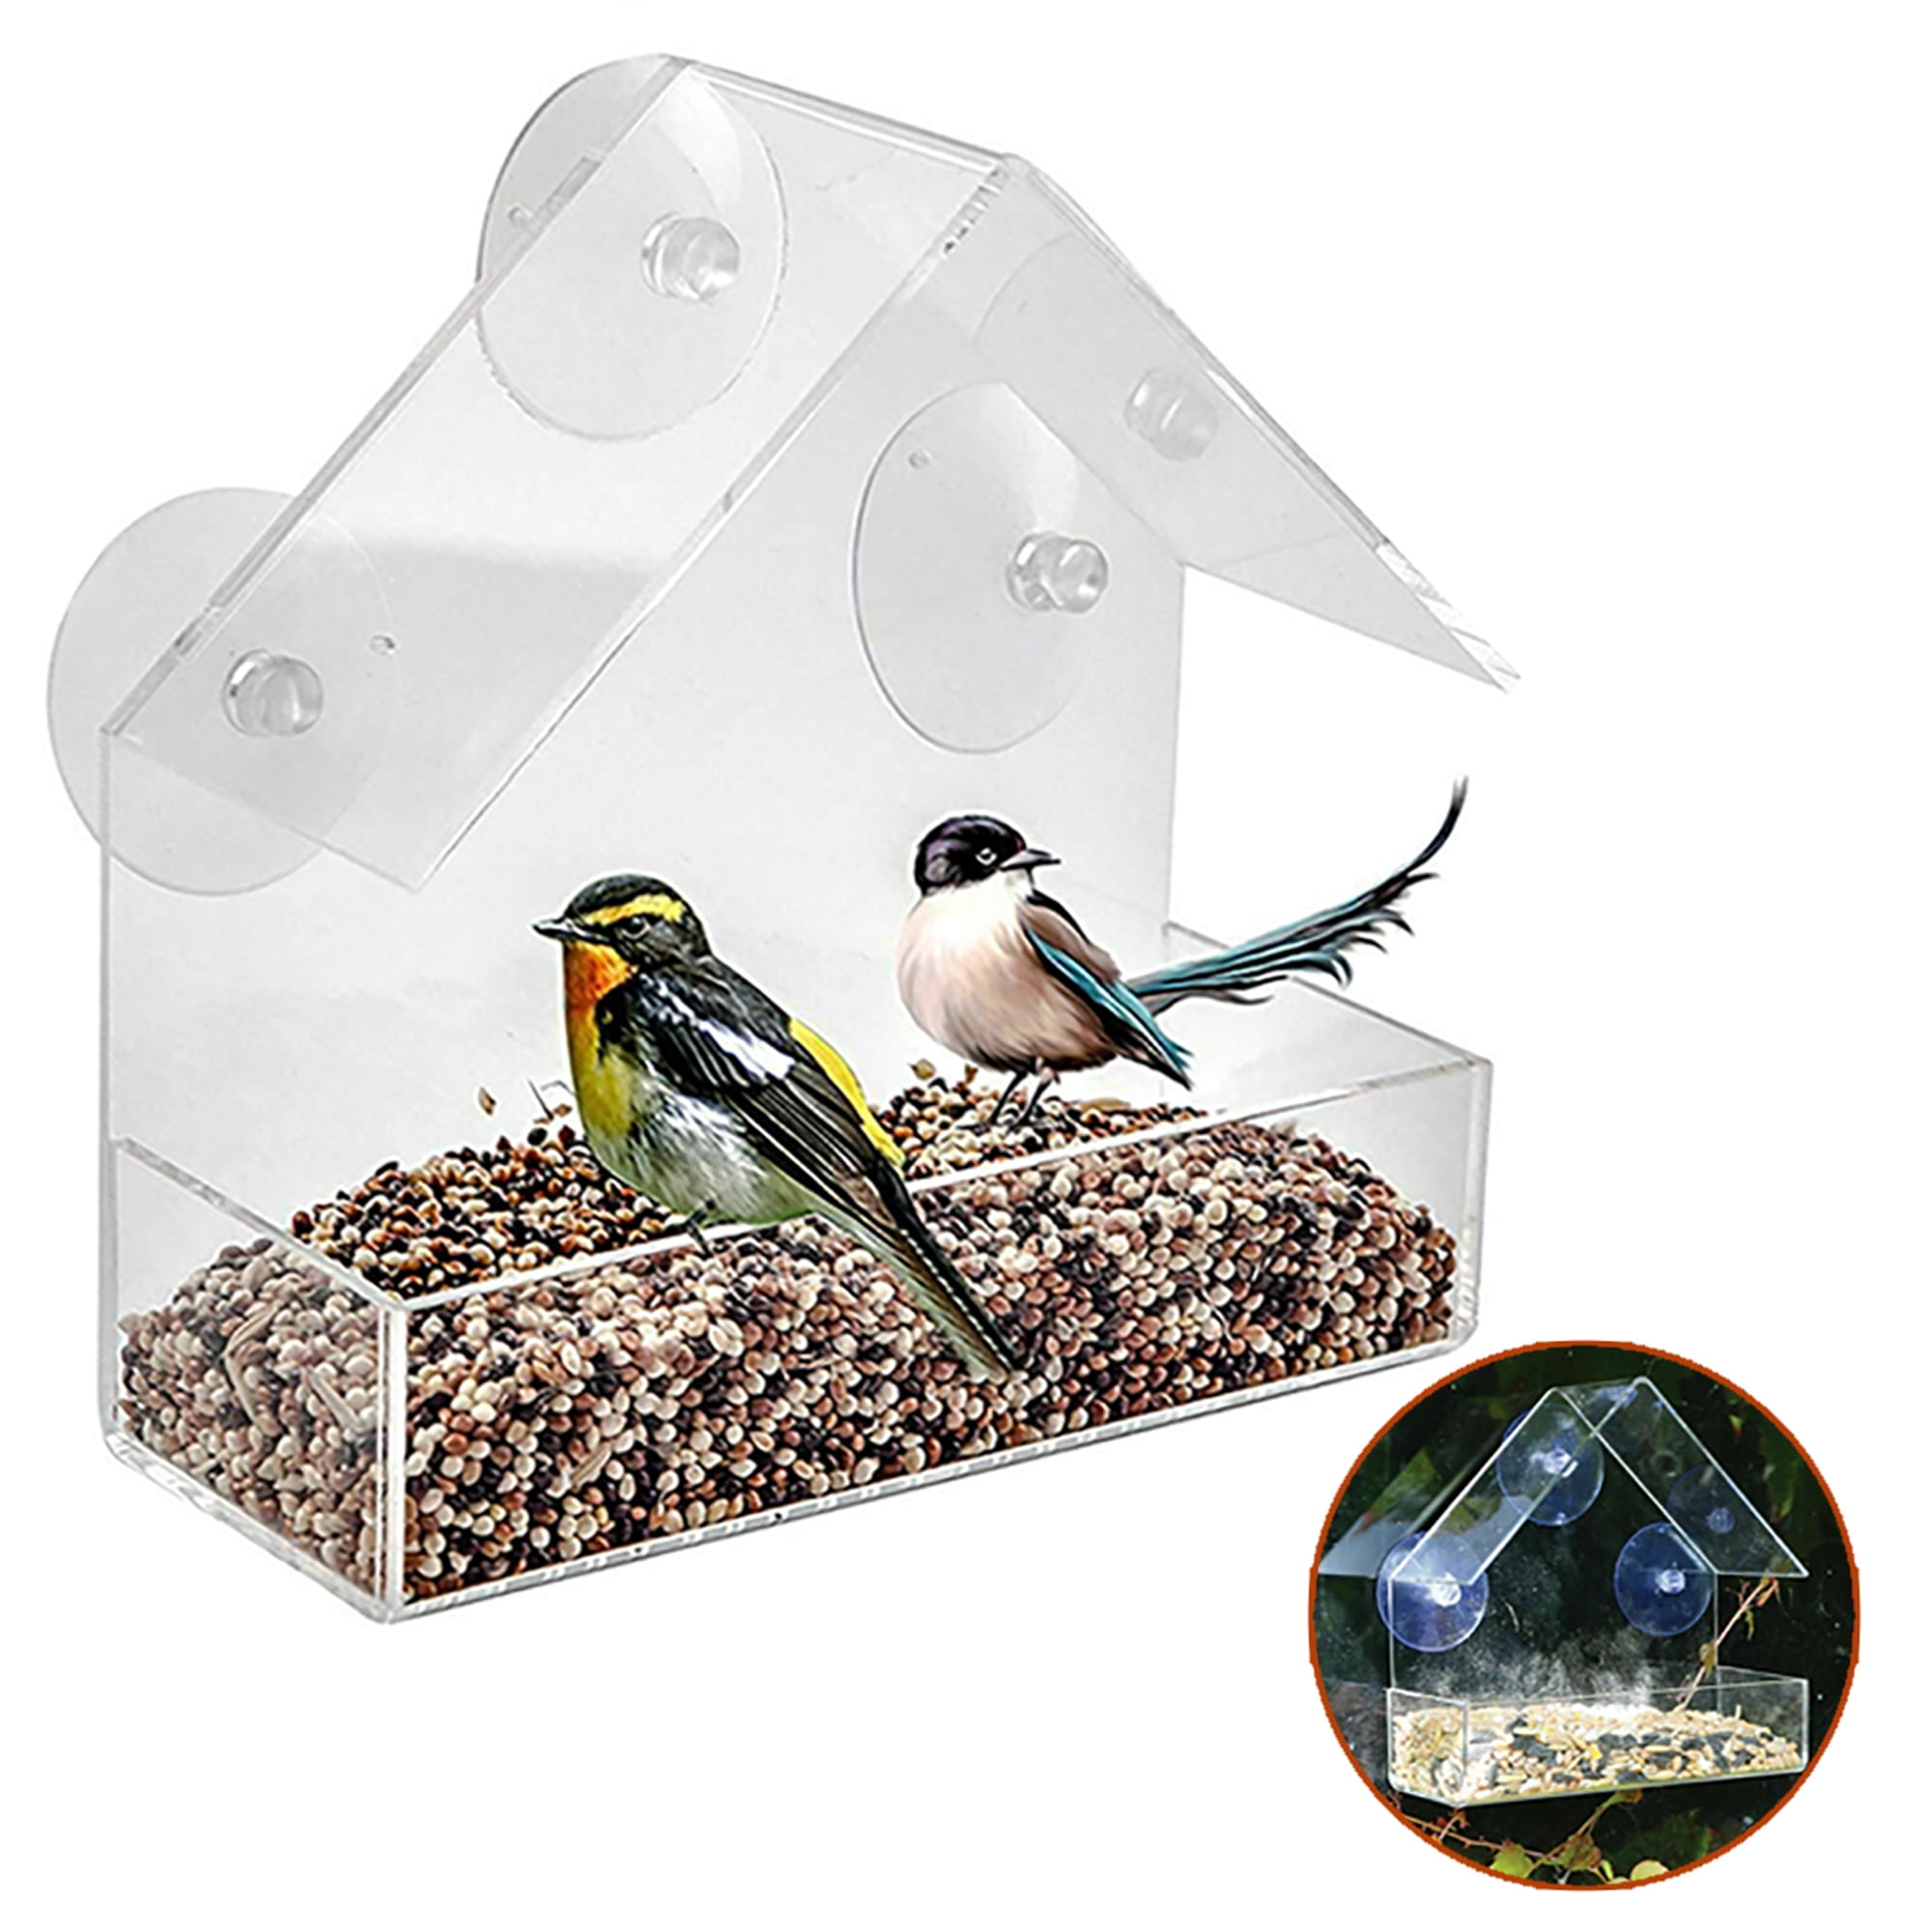 Acrylic Window Bird Feeder with Strong Suction Cup Seed Tray Outdoor Birdfeeders 